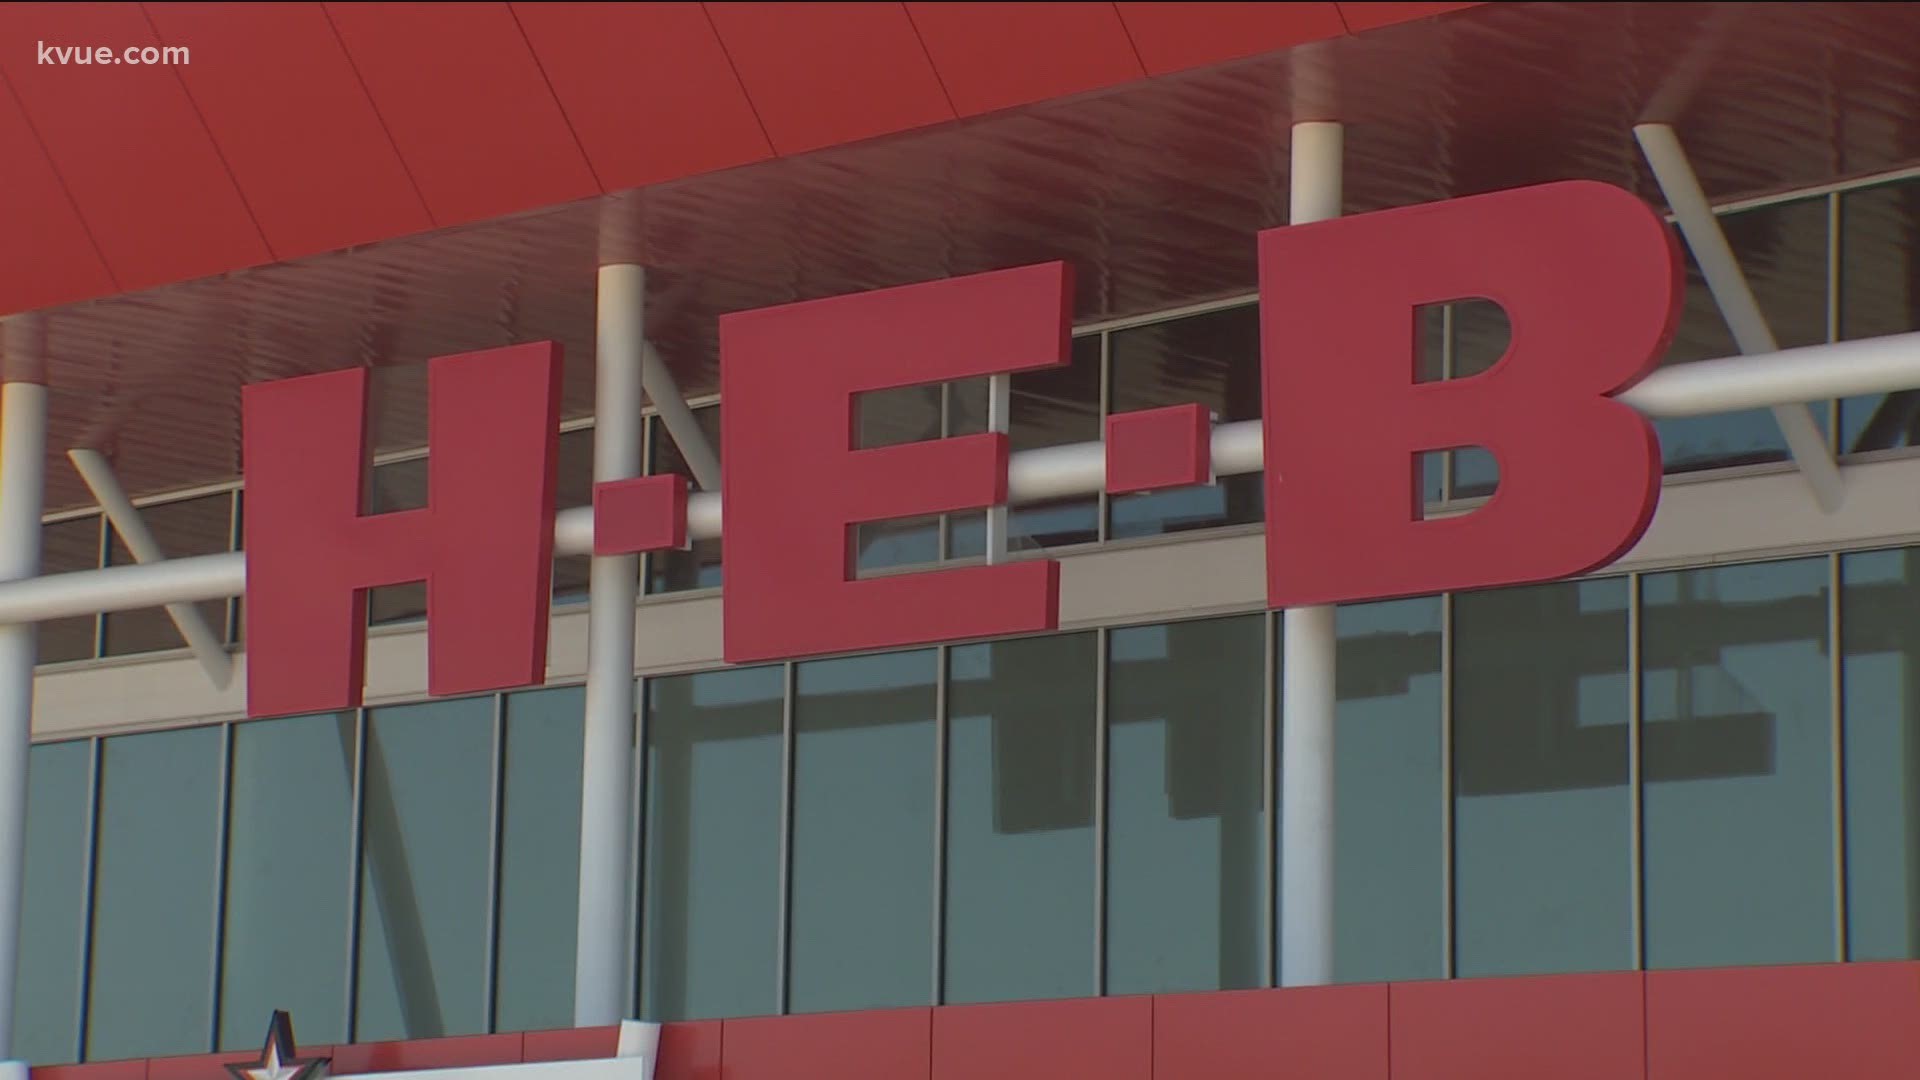 While the chain is expanding south, it will not be messing with Texas or its beloved grocer, H-E-B.